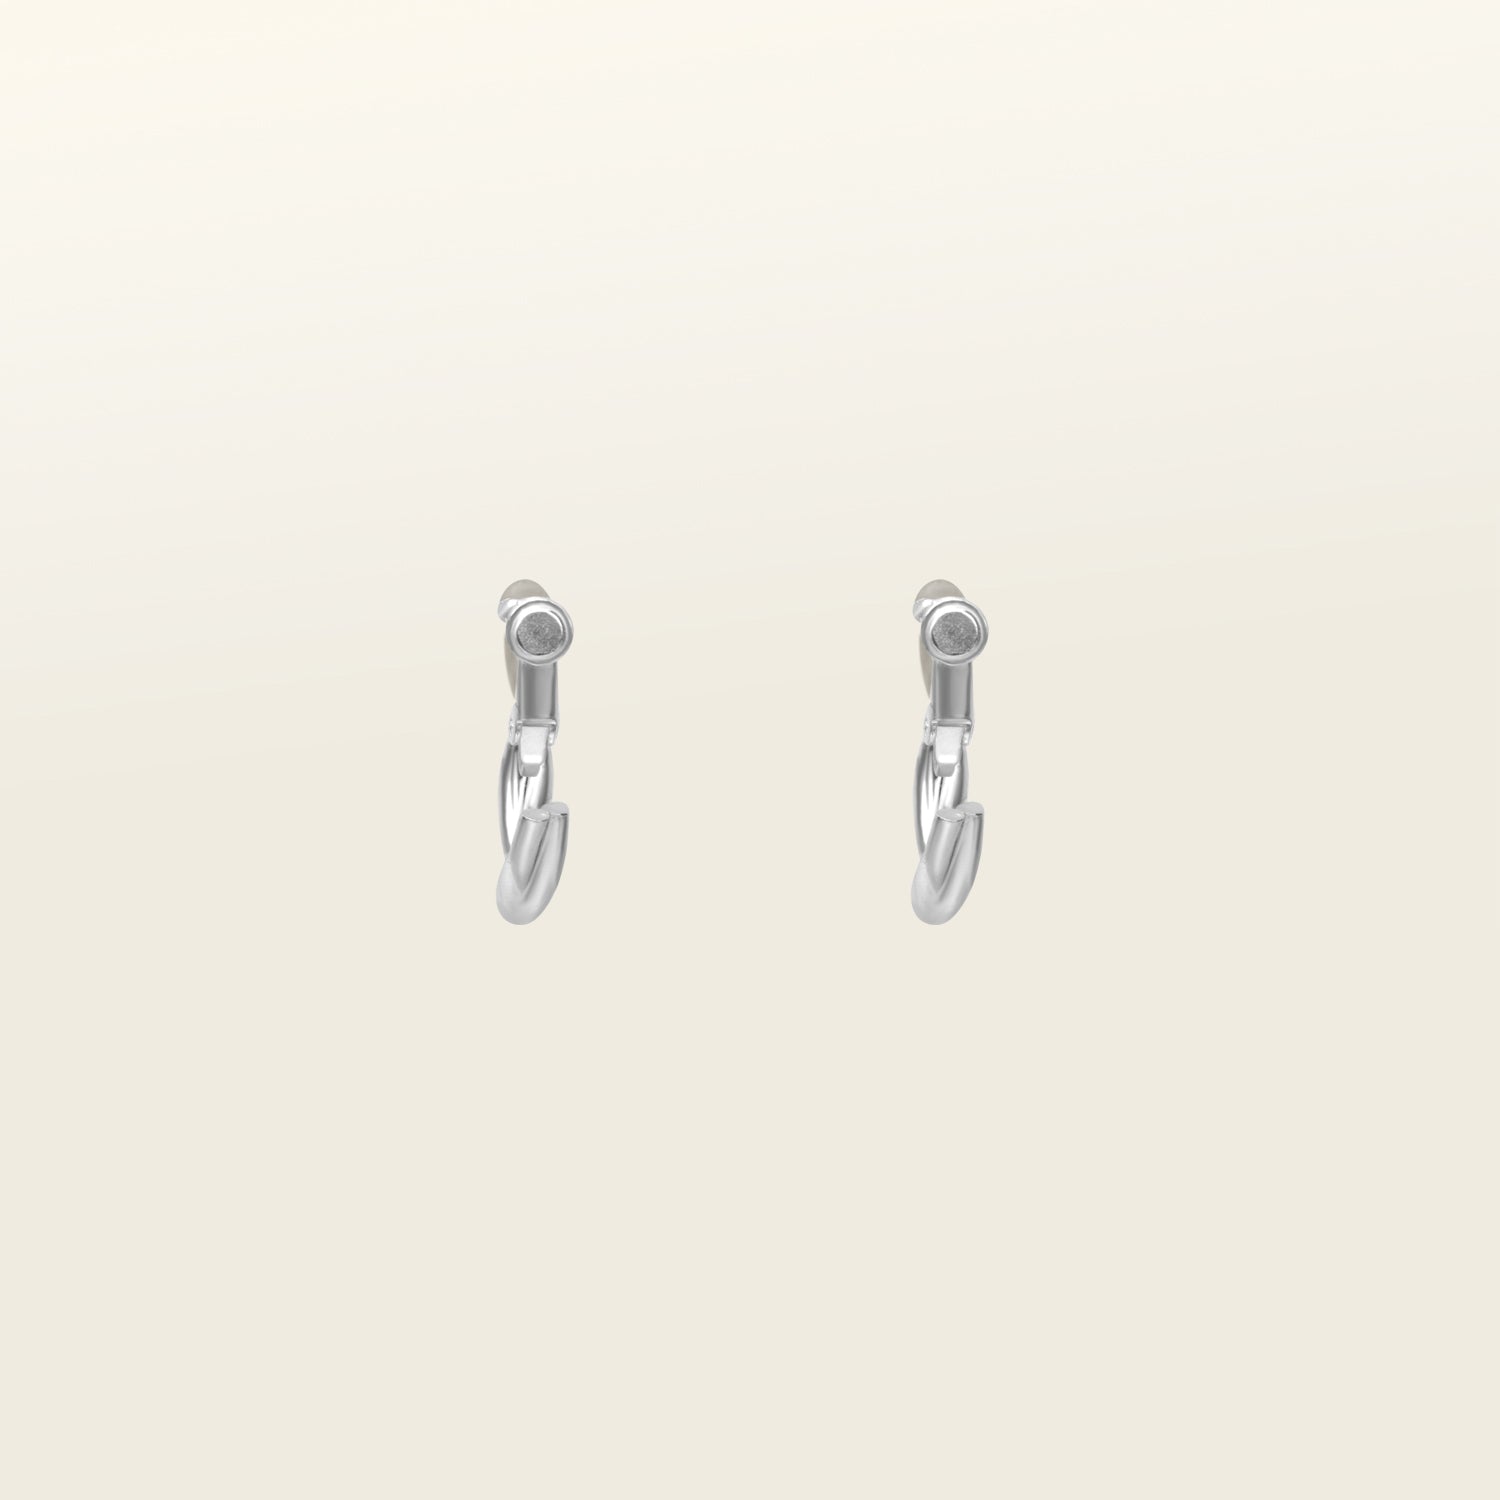 Image of the Twist Hoop Earrings feature a secure and comfortable screwback clip-on closure ideal for all ear types. Wear these earrings for up to 8-12 hours per day with a secure hold and the ability to be manually adjusted to the individual's size. Crafted from gold tone plated copper alloy, these earrings come is a single pair.